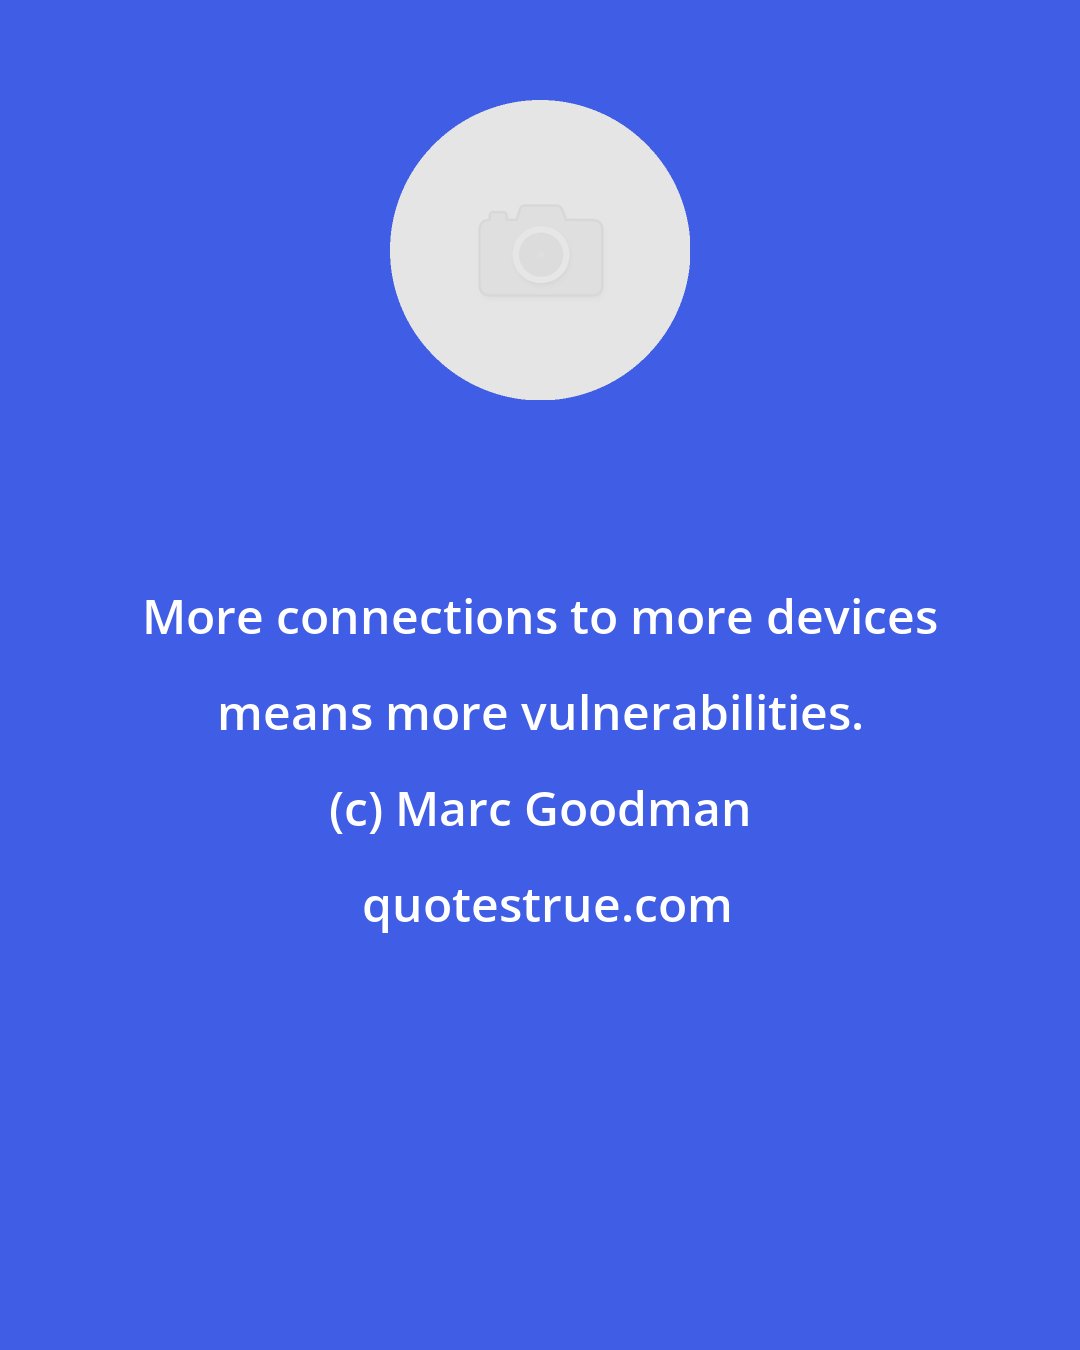 Marc Goodman: More connections to more devices means more vulnerabilities.